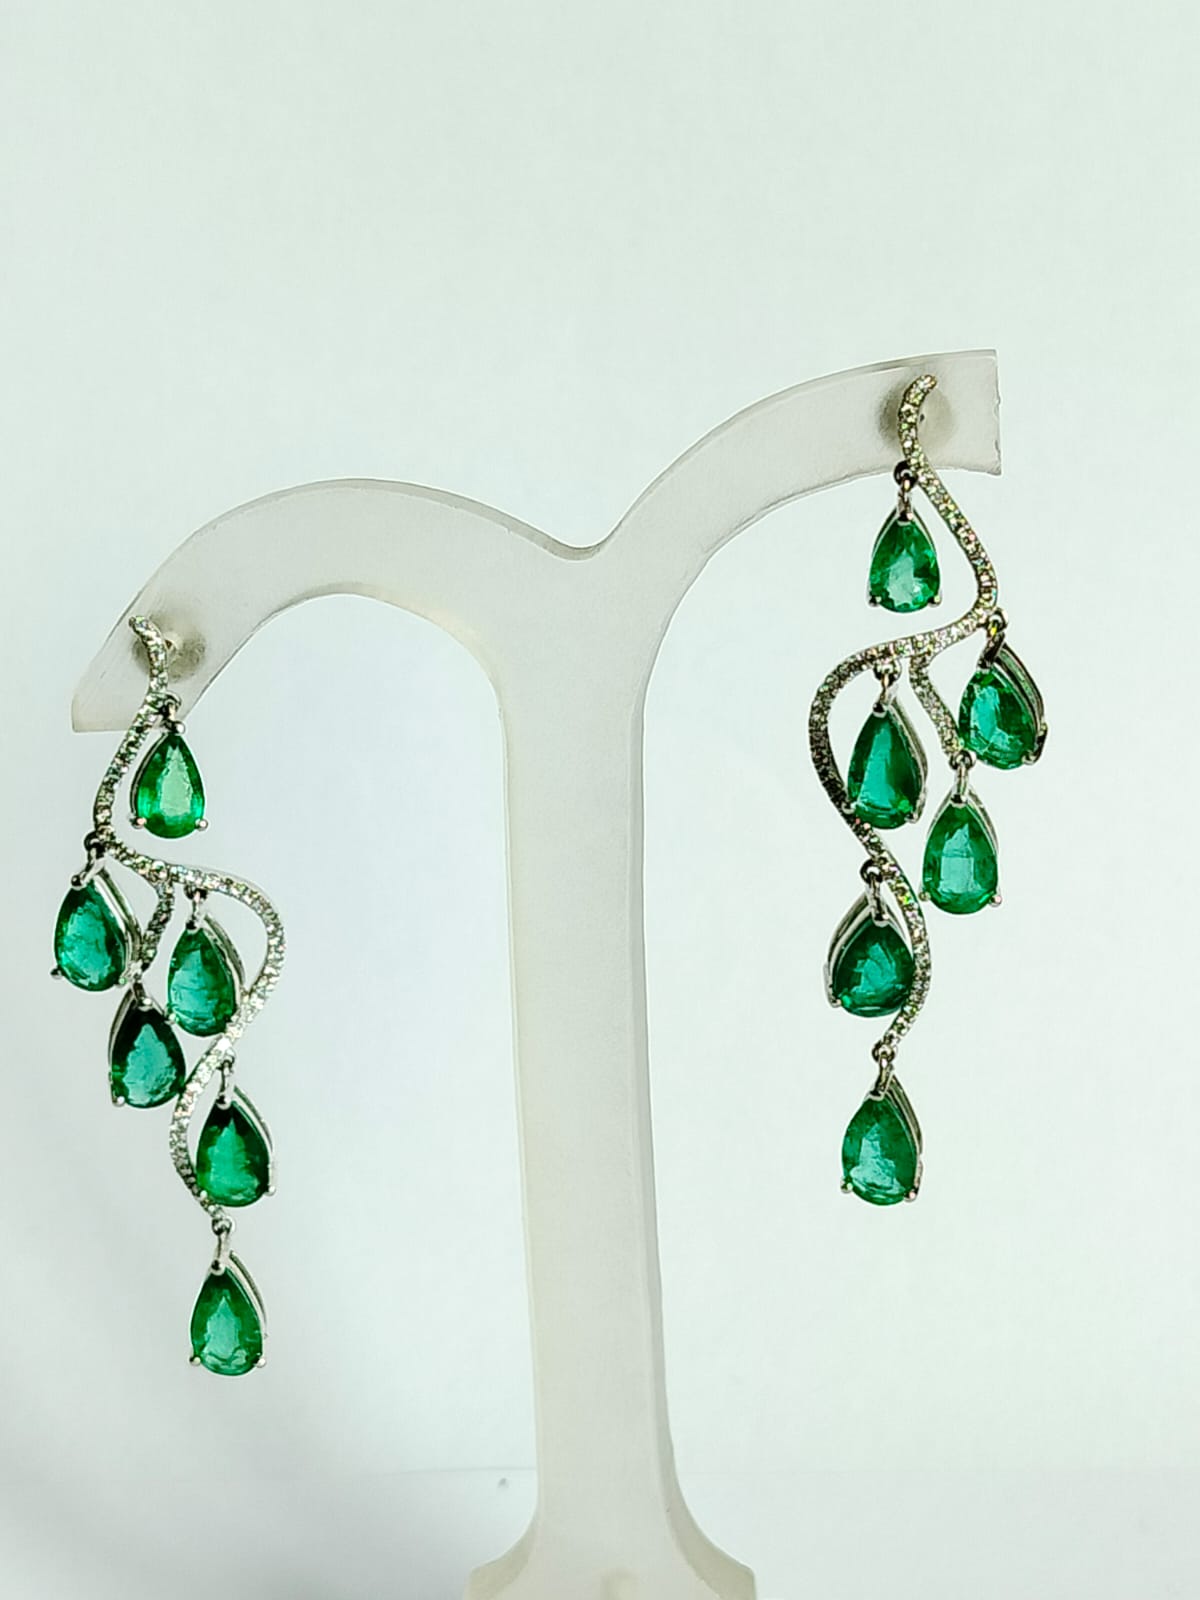 A very gorgeous and beautiful, Emerald Chandelier Earrings / Shoulder Dusters set in 18K White Gold. The weight of the pear shaped Emeralds is 7.81 carats. The Emeralds are completely natural, without any treatment and is of Zambian origin. The